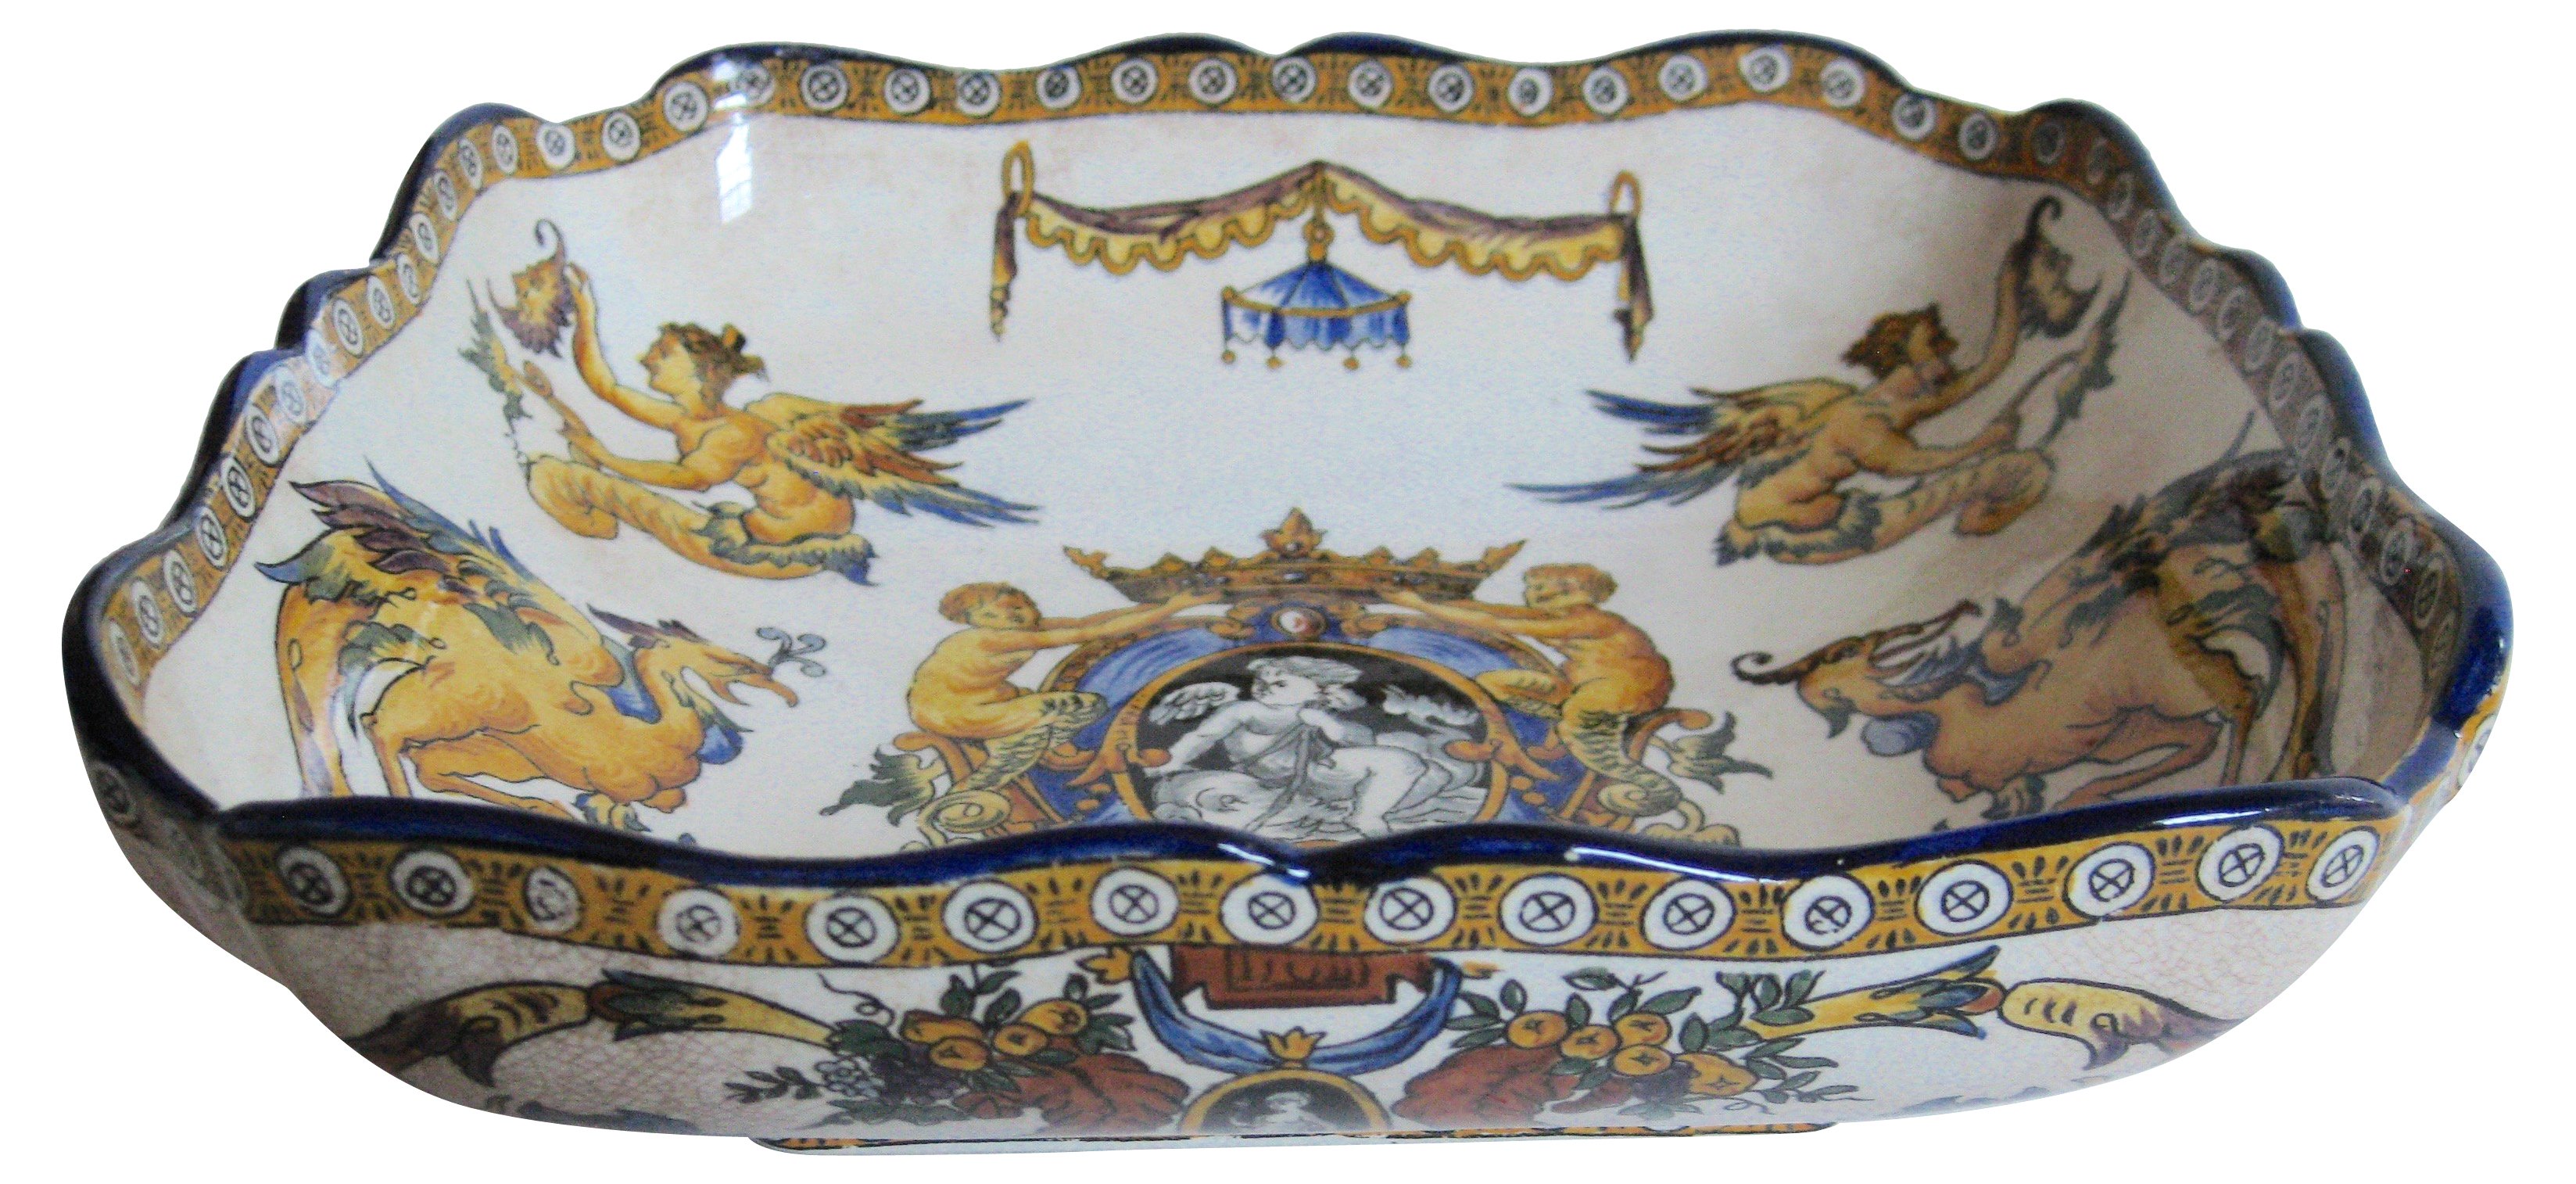 19th-C. French Faience Serving Bowl~P77129364